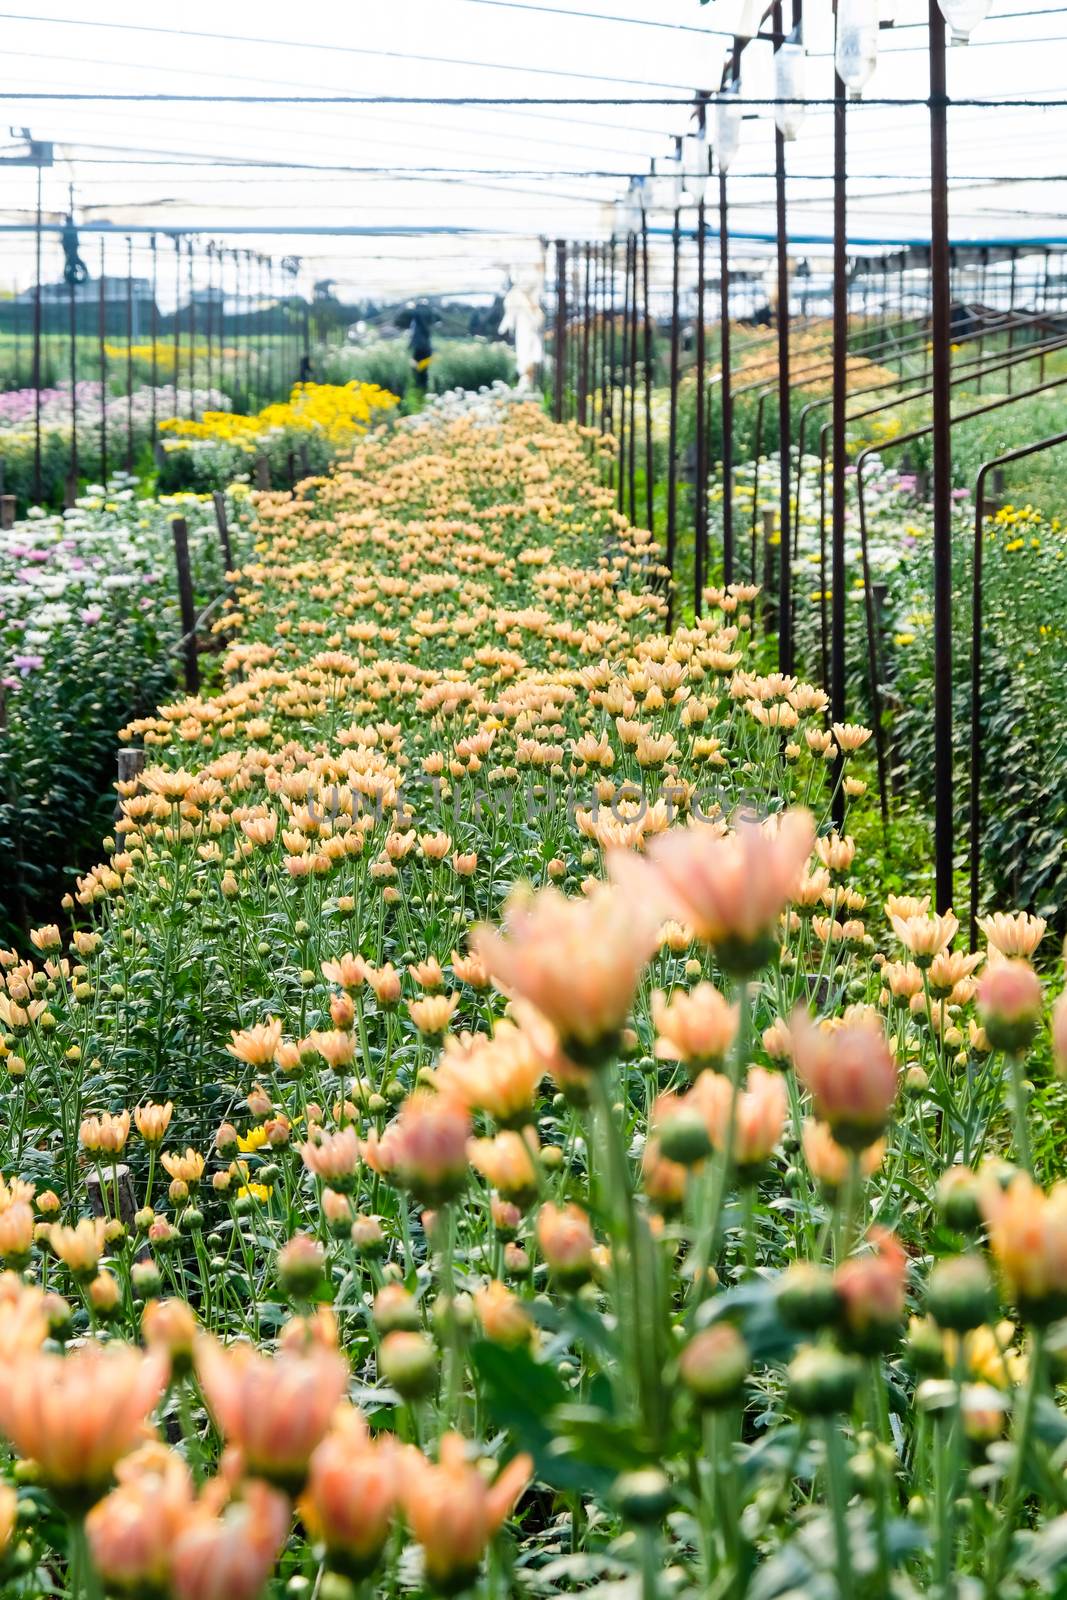 View of Gerbera cultivated flower beds by ponsulak